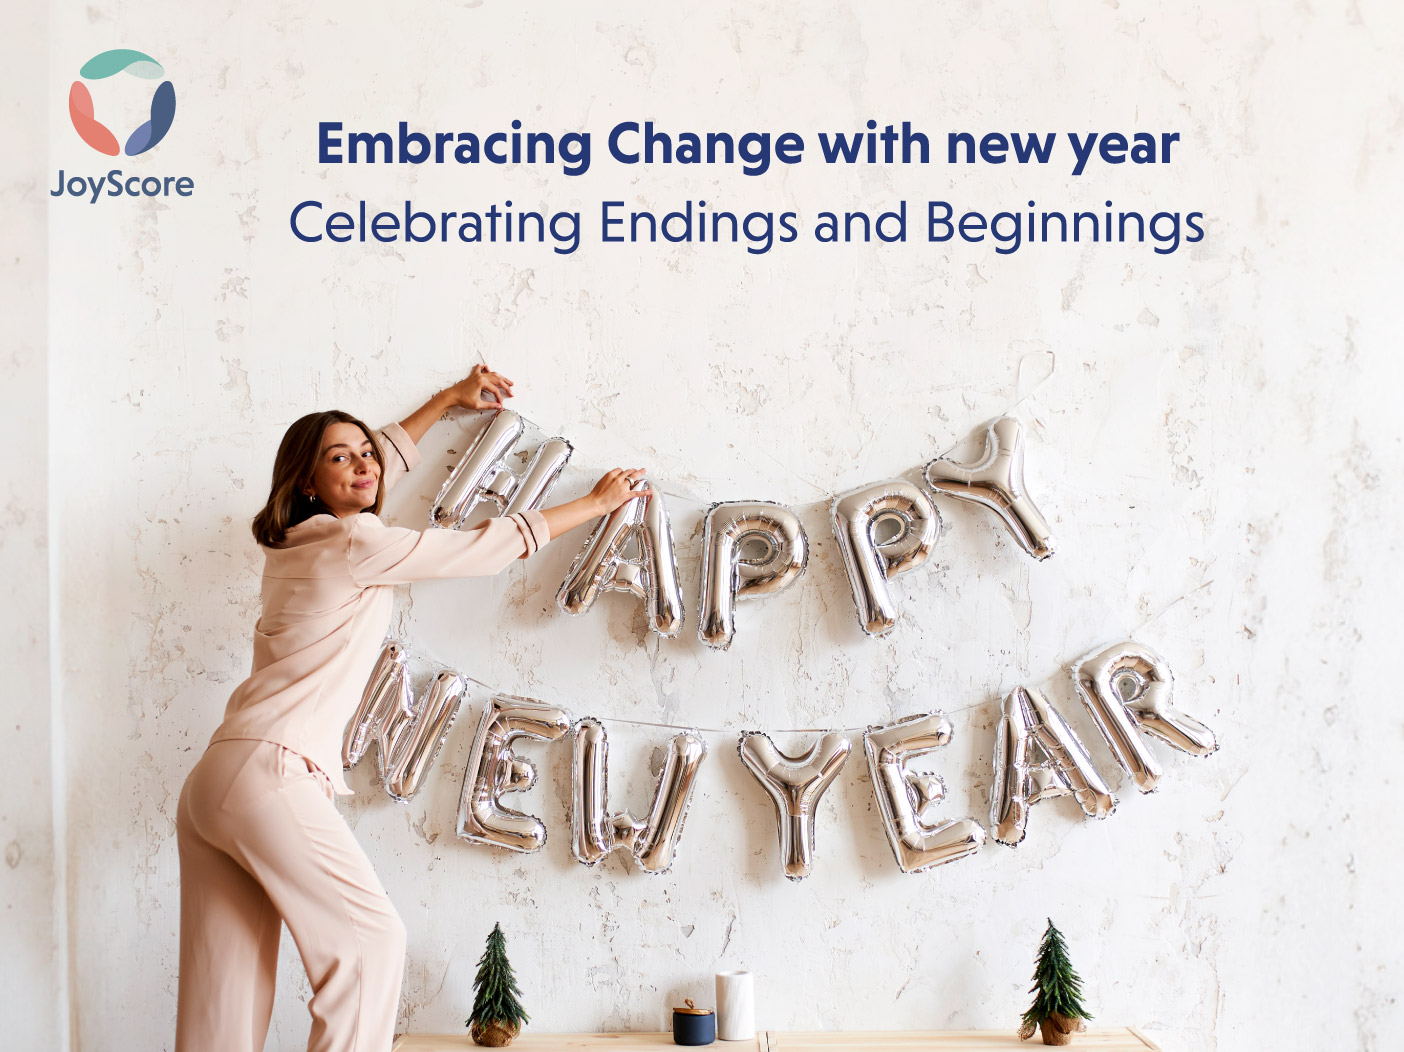 Embracing Change with new year The Beauty of Celebrating Endings and Beginnings